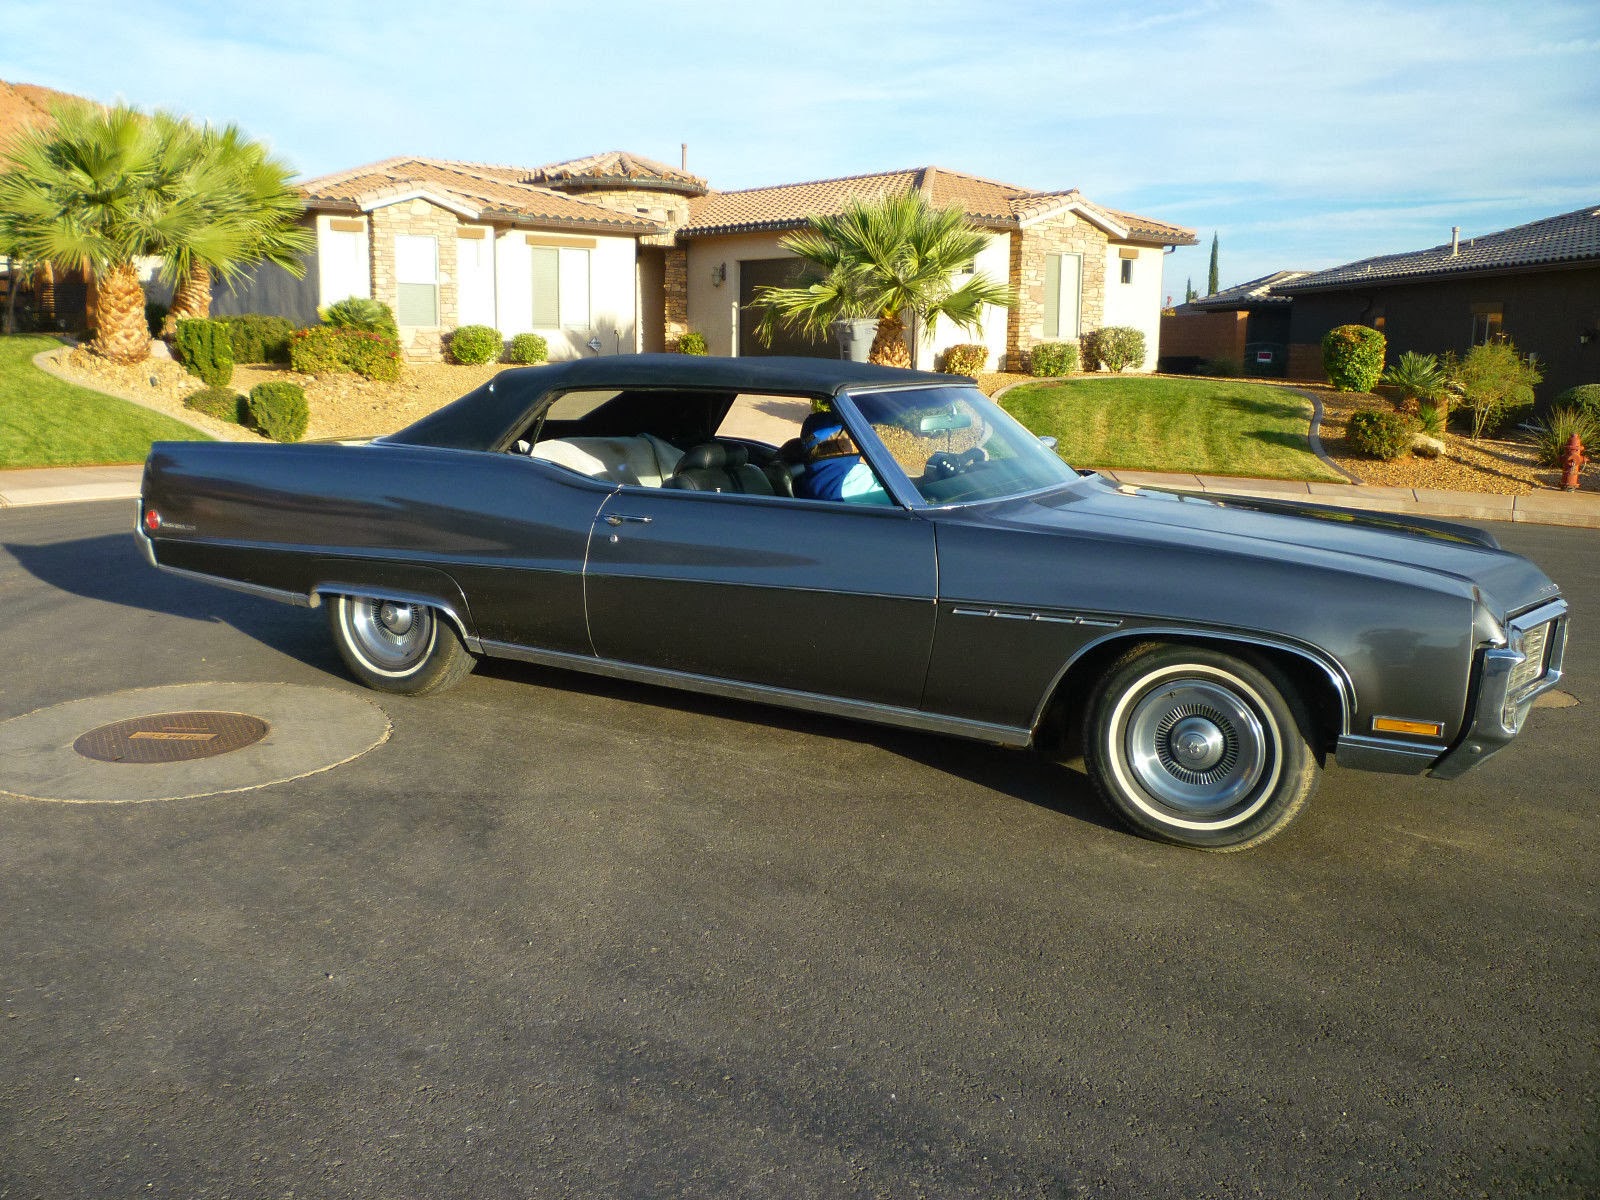 Crawling From The Wreckage: 1970 Buick Electra 225 Convertib